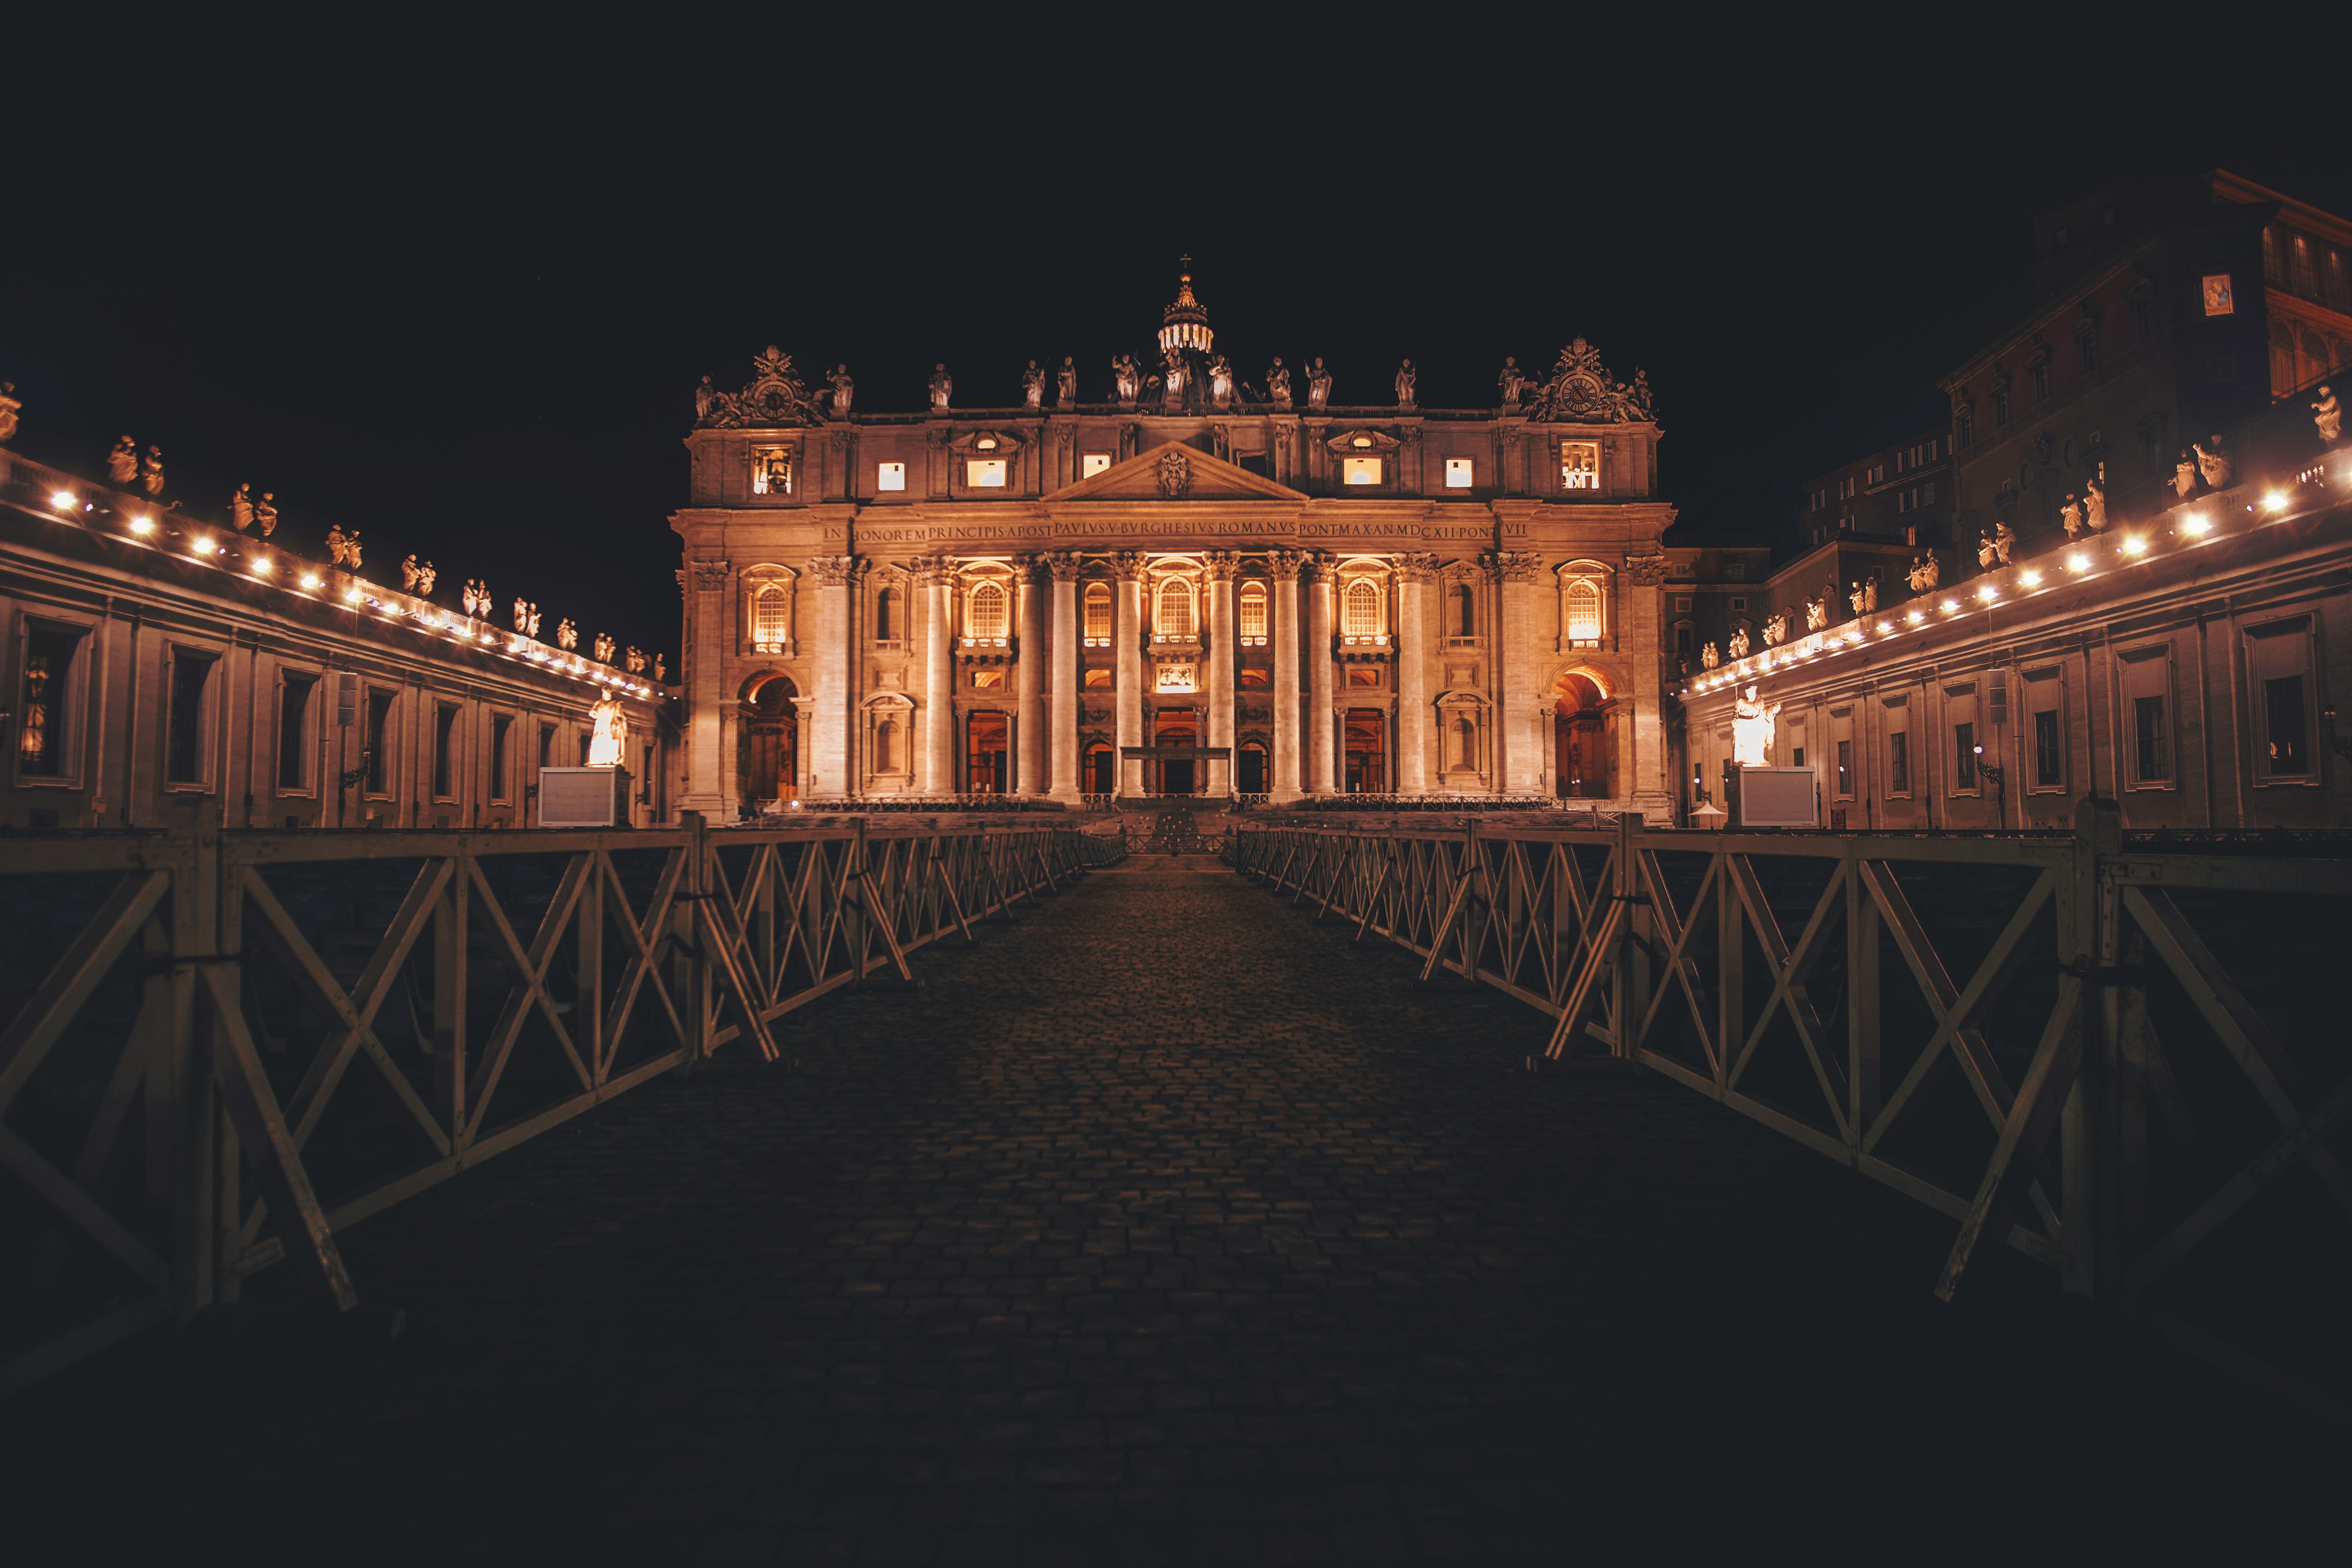 pathway leading to Saint Peter's Basilica at night time